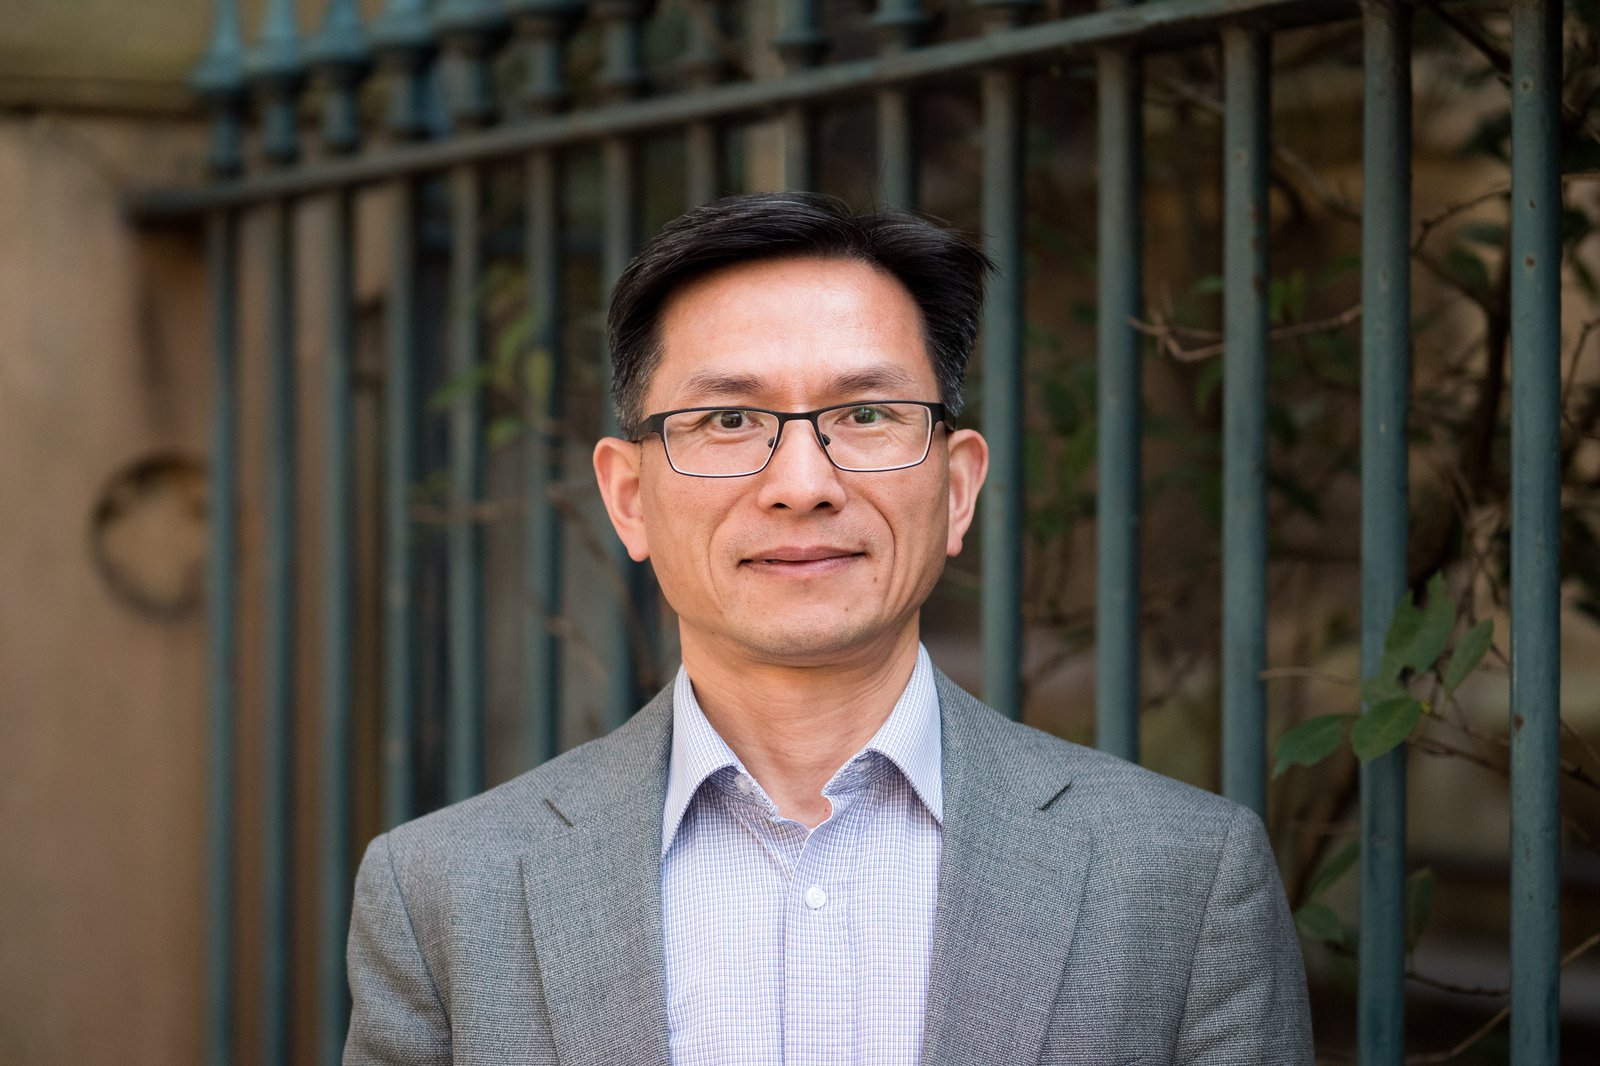 University of Technology Sydney Eureka Prize for Excellence in Data Science Professor Longbing Cao